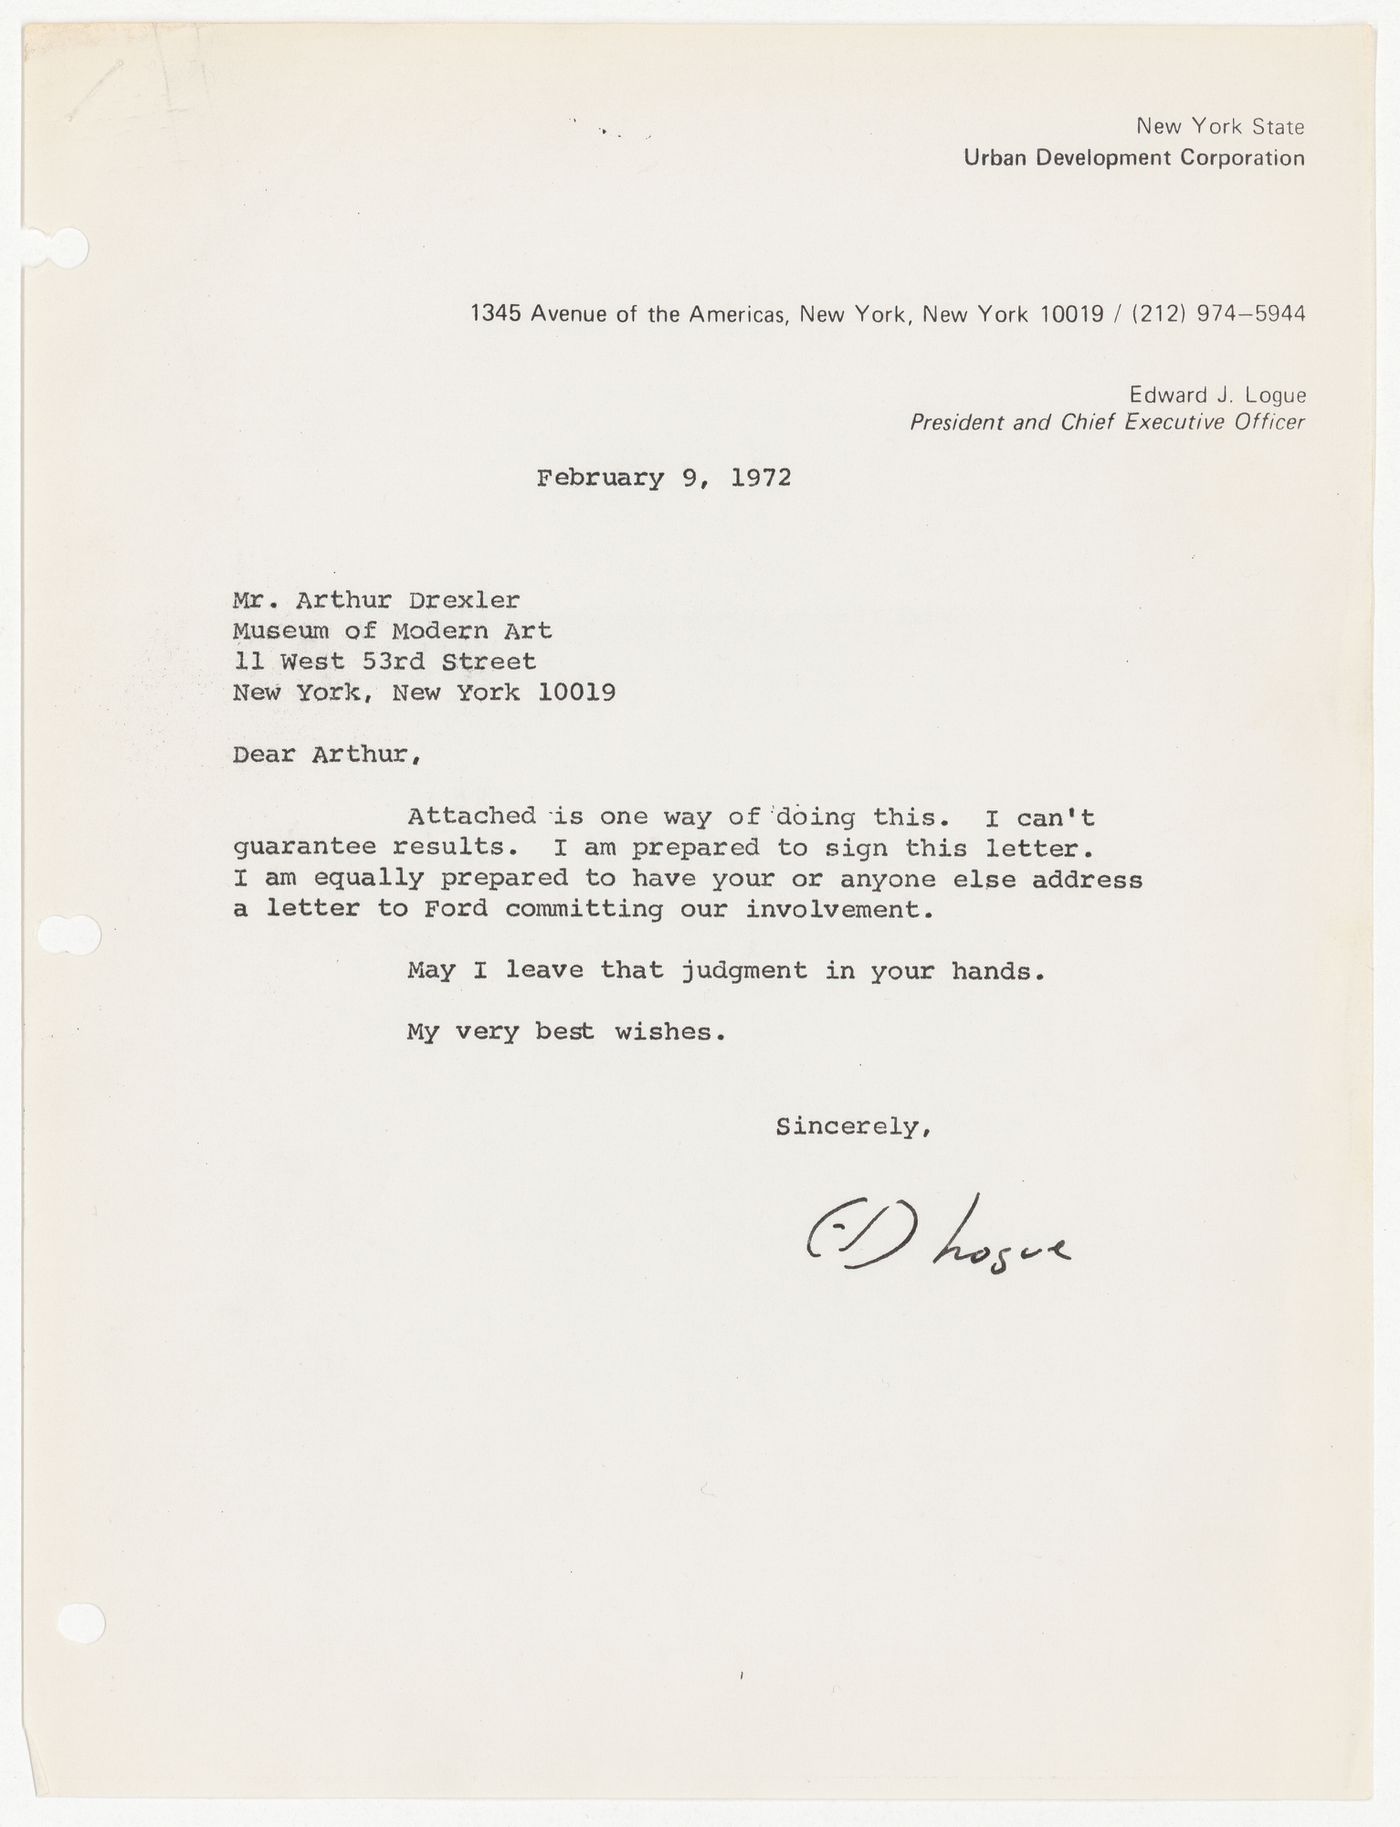 Letter from Edward J. Logue to Arthur Drexler with attached draft letter from Edward J. Logue to Louis Winnick soliciting a donation from the Ford Foundation